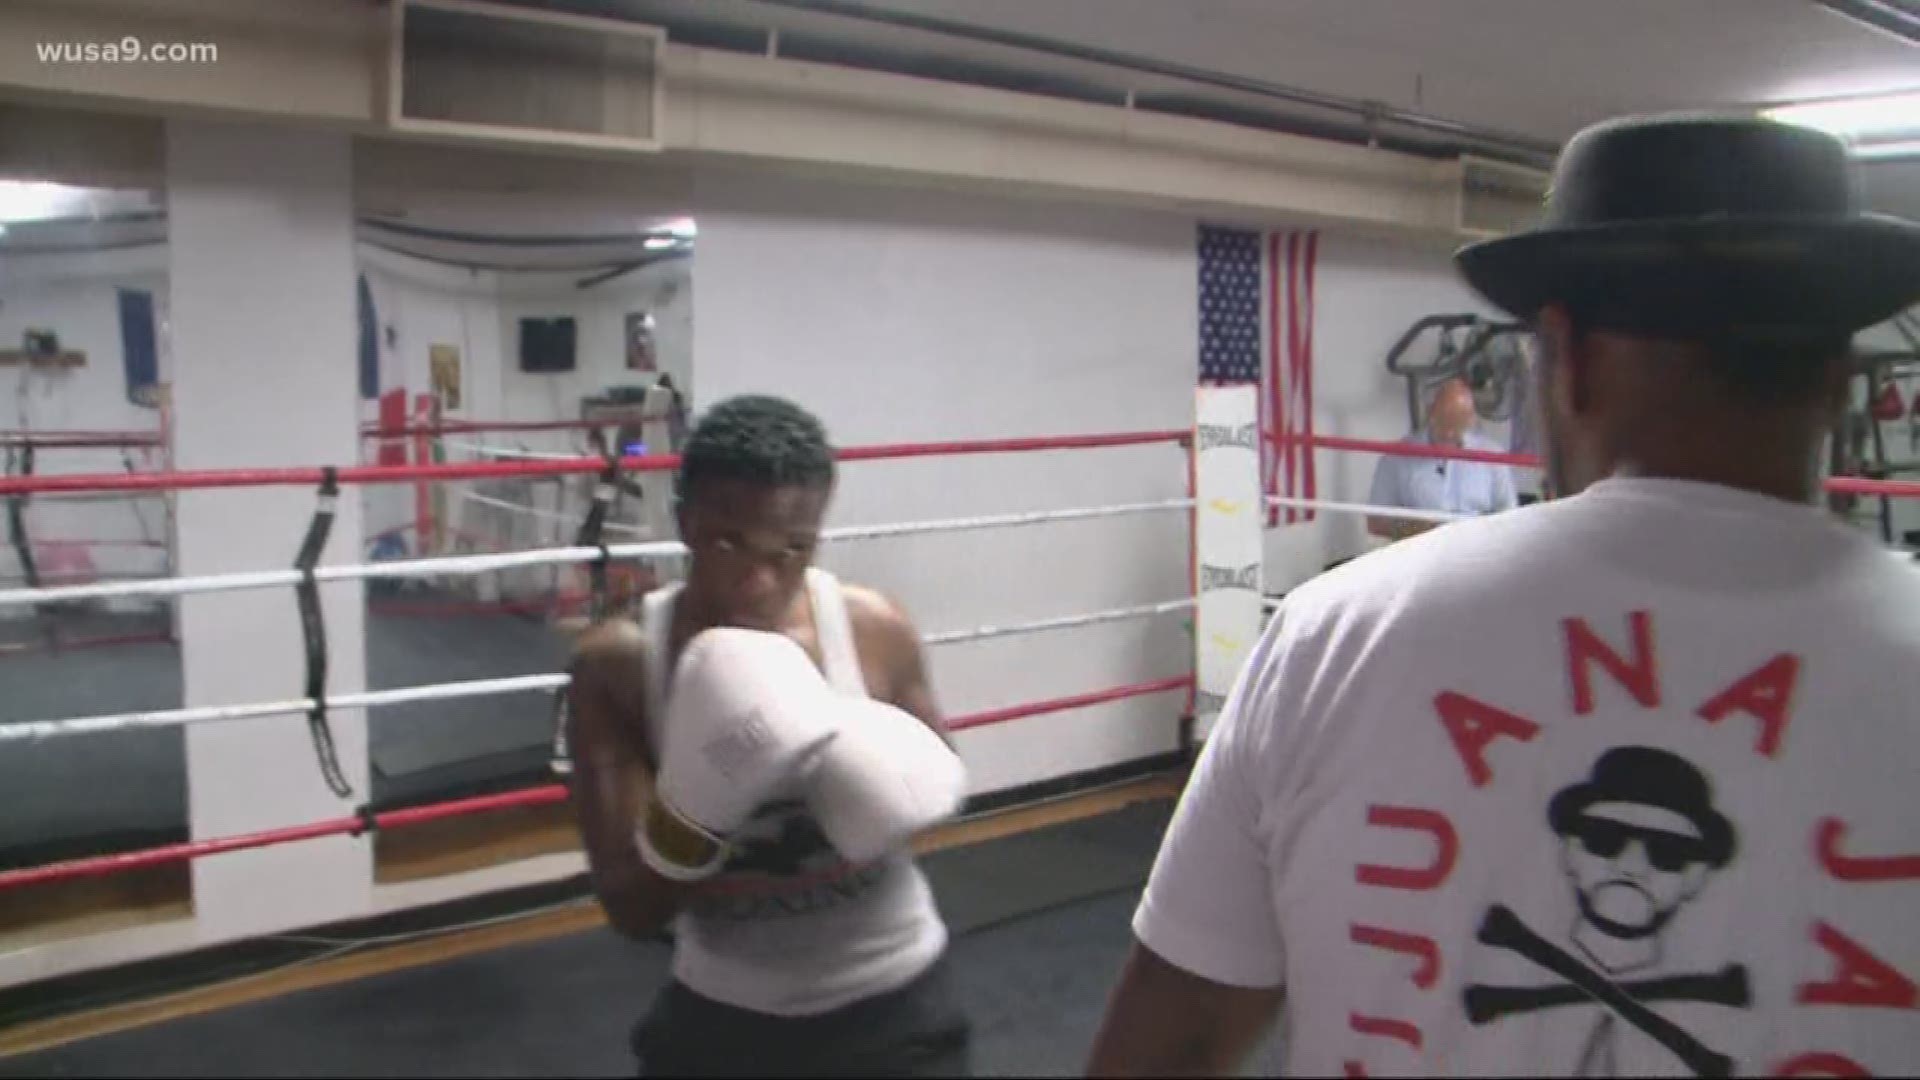 Officer Tiara Brown is more than just a DC police officer and a boxer. She's striving to be a role model in her community.